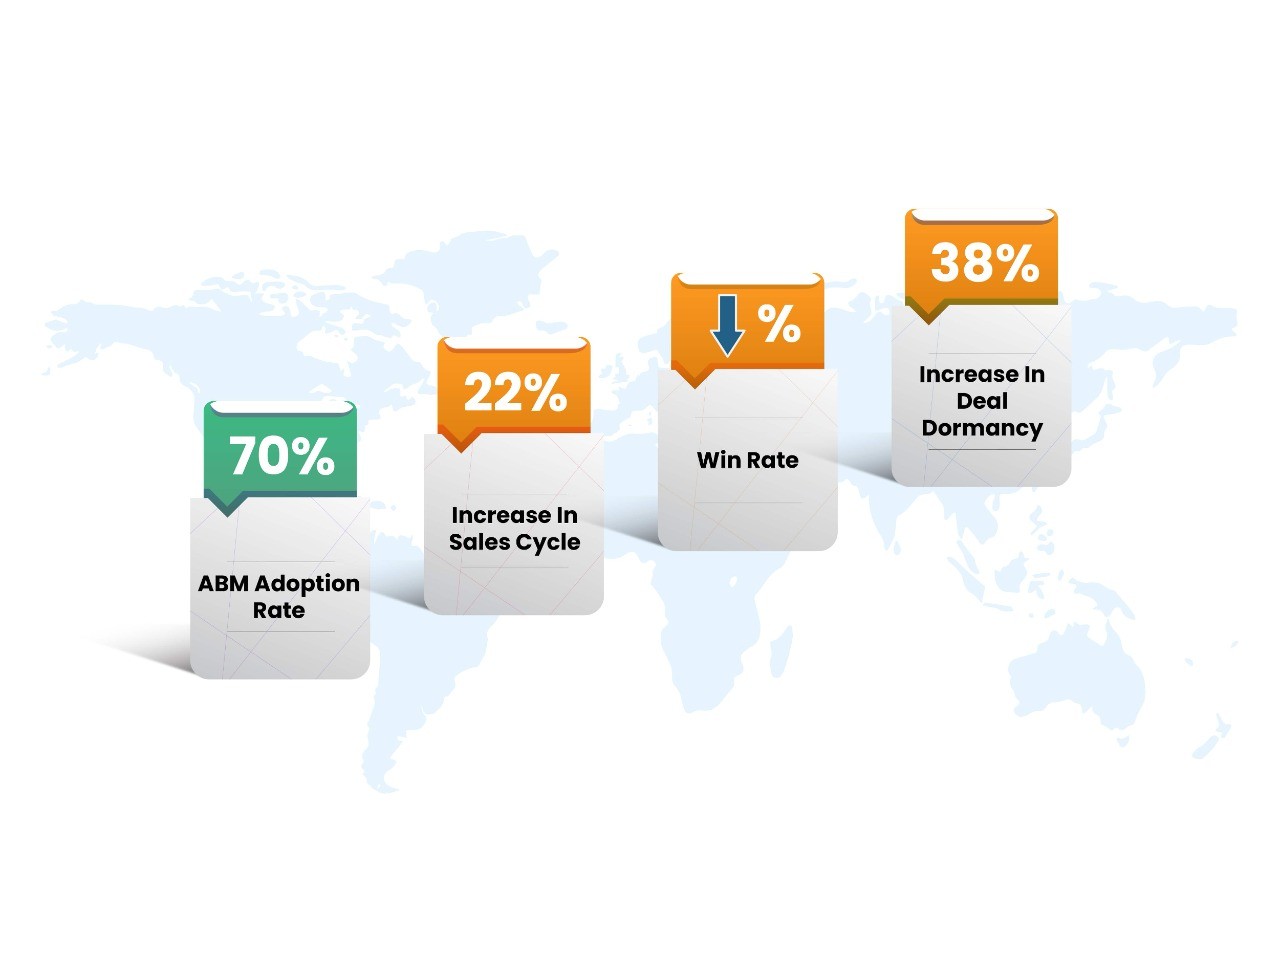 B2B marketing stats with respect to ABM across the world.
﻿